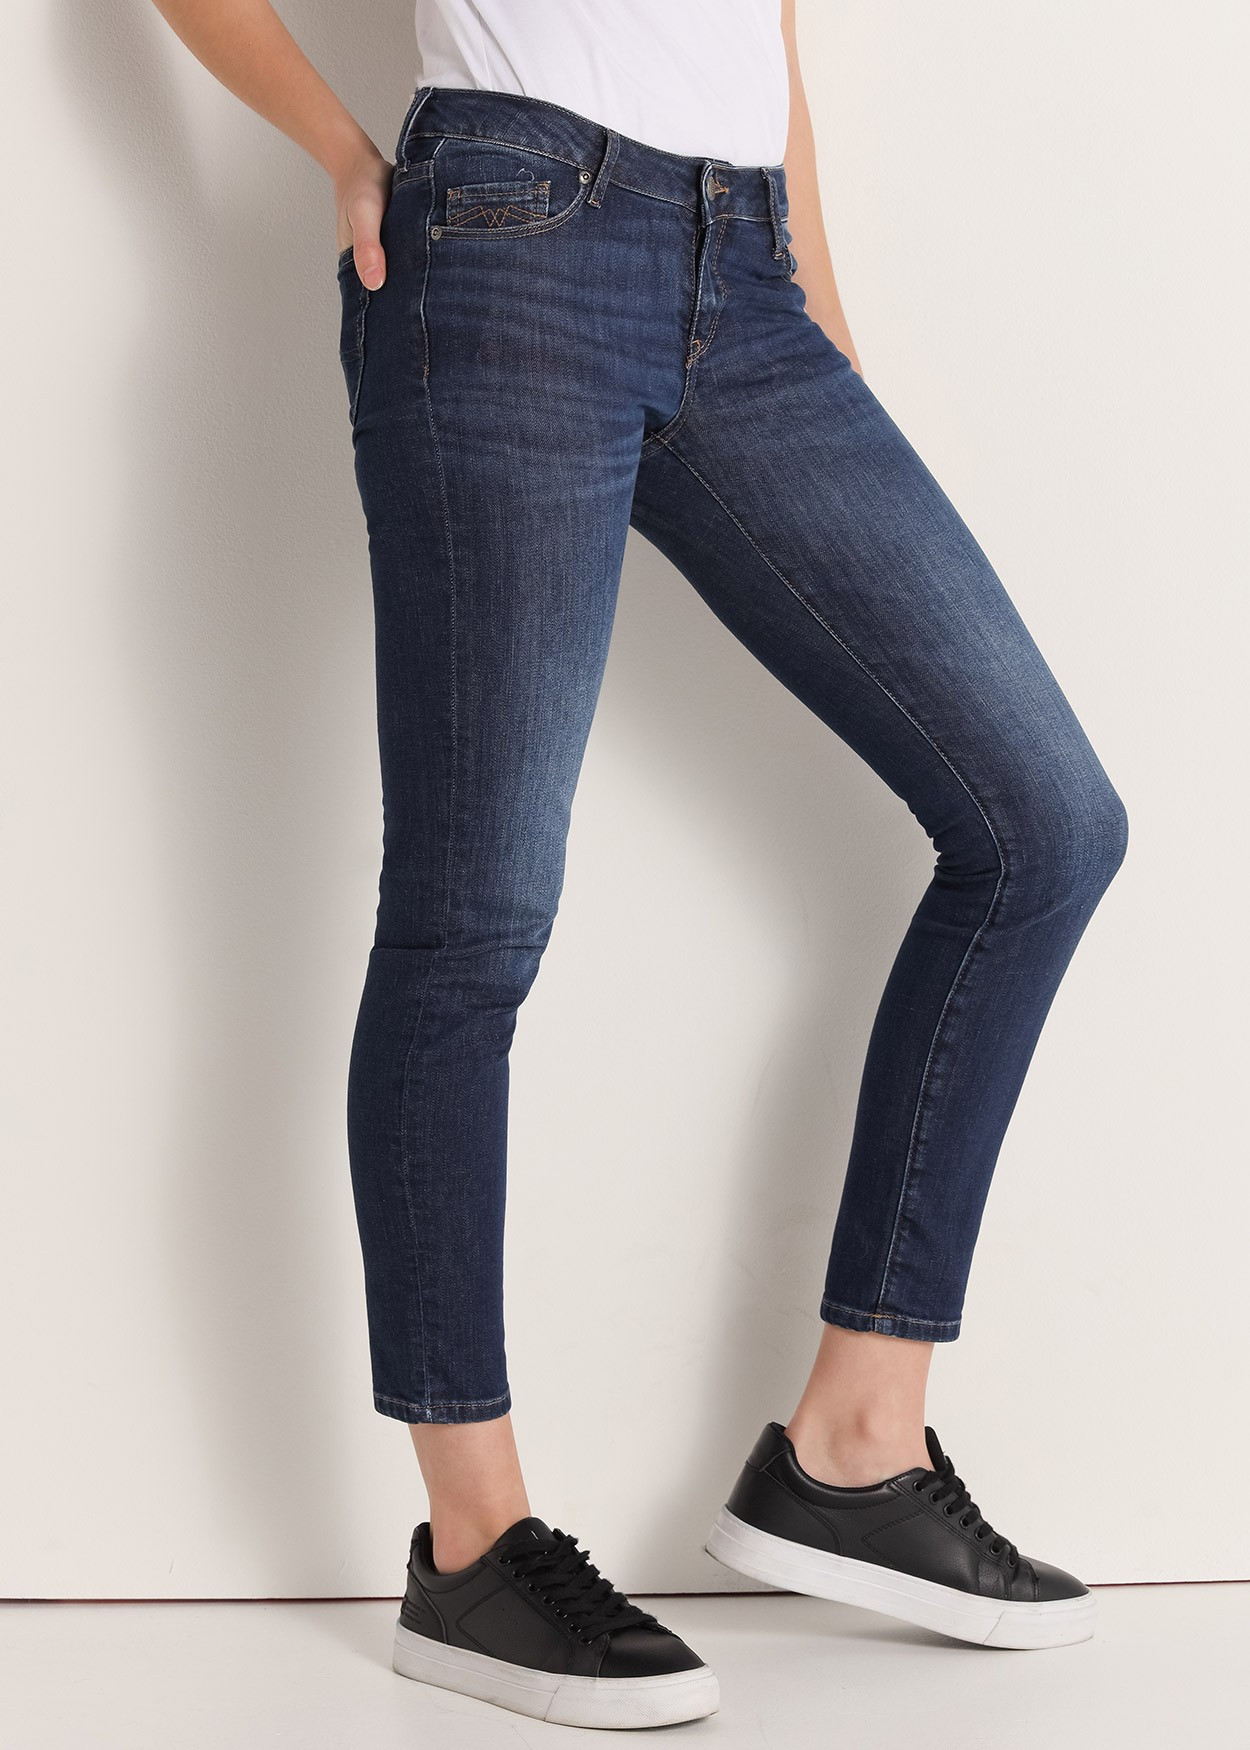 ENYA KYRA - Jeans | Taille Basse| Skinny Ankle Fit | Taille en pouces Cimarron